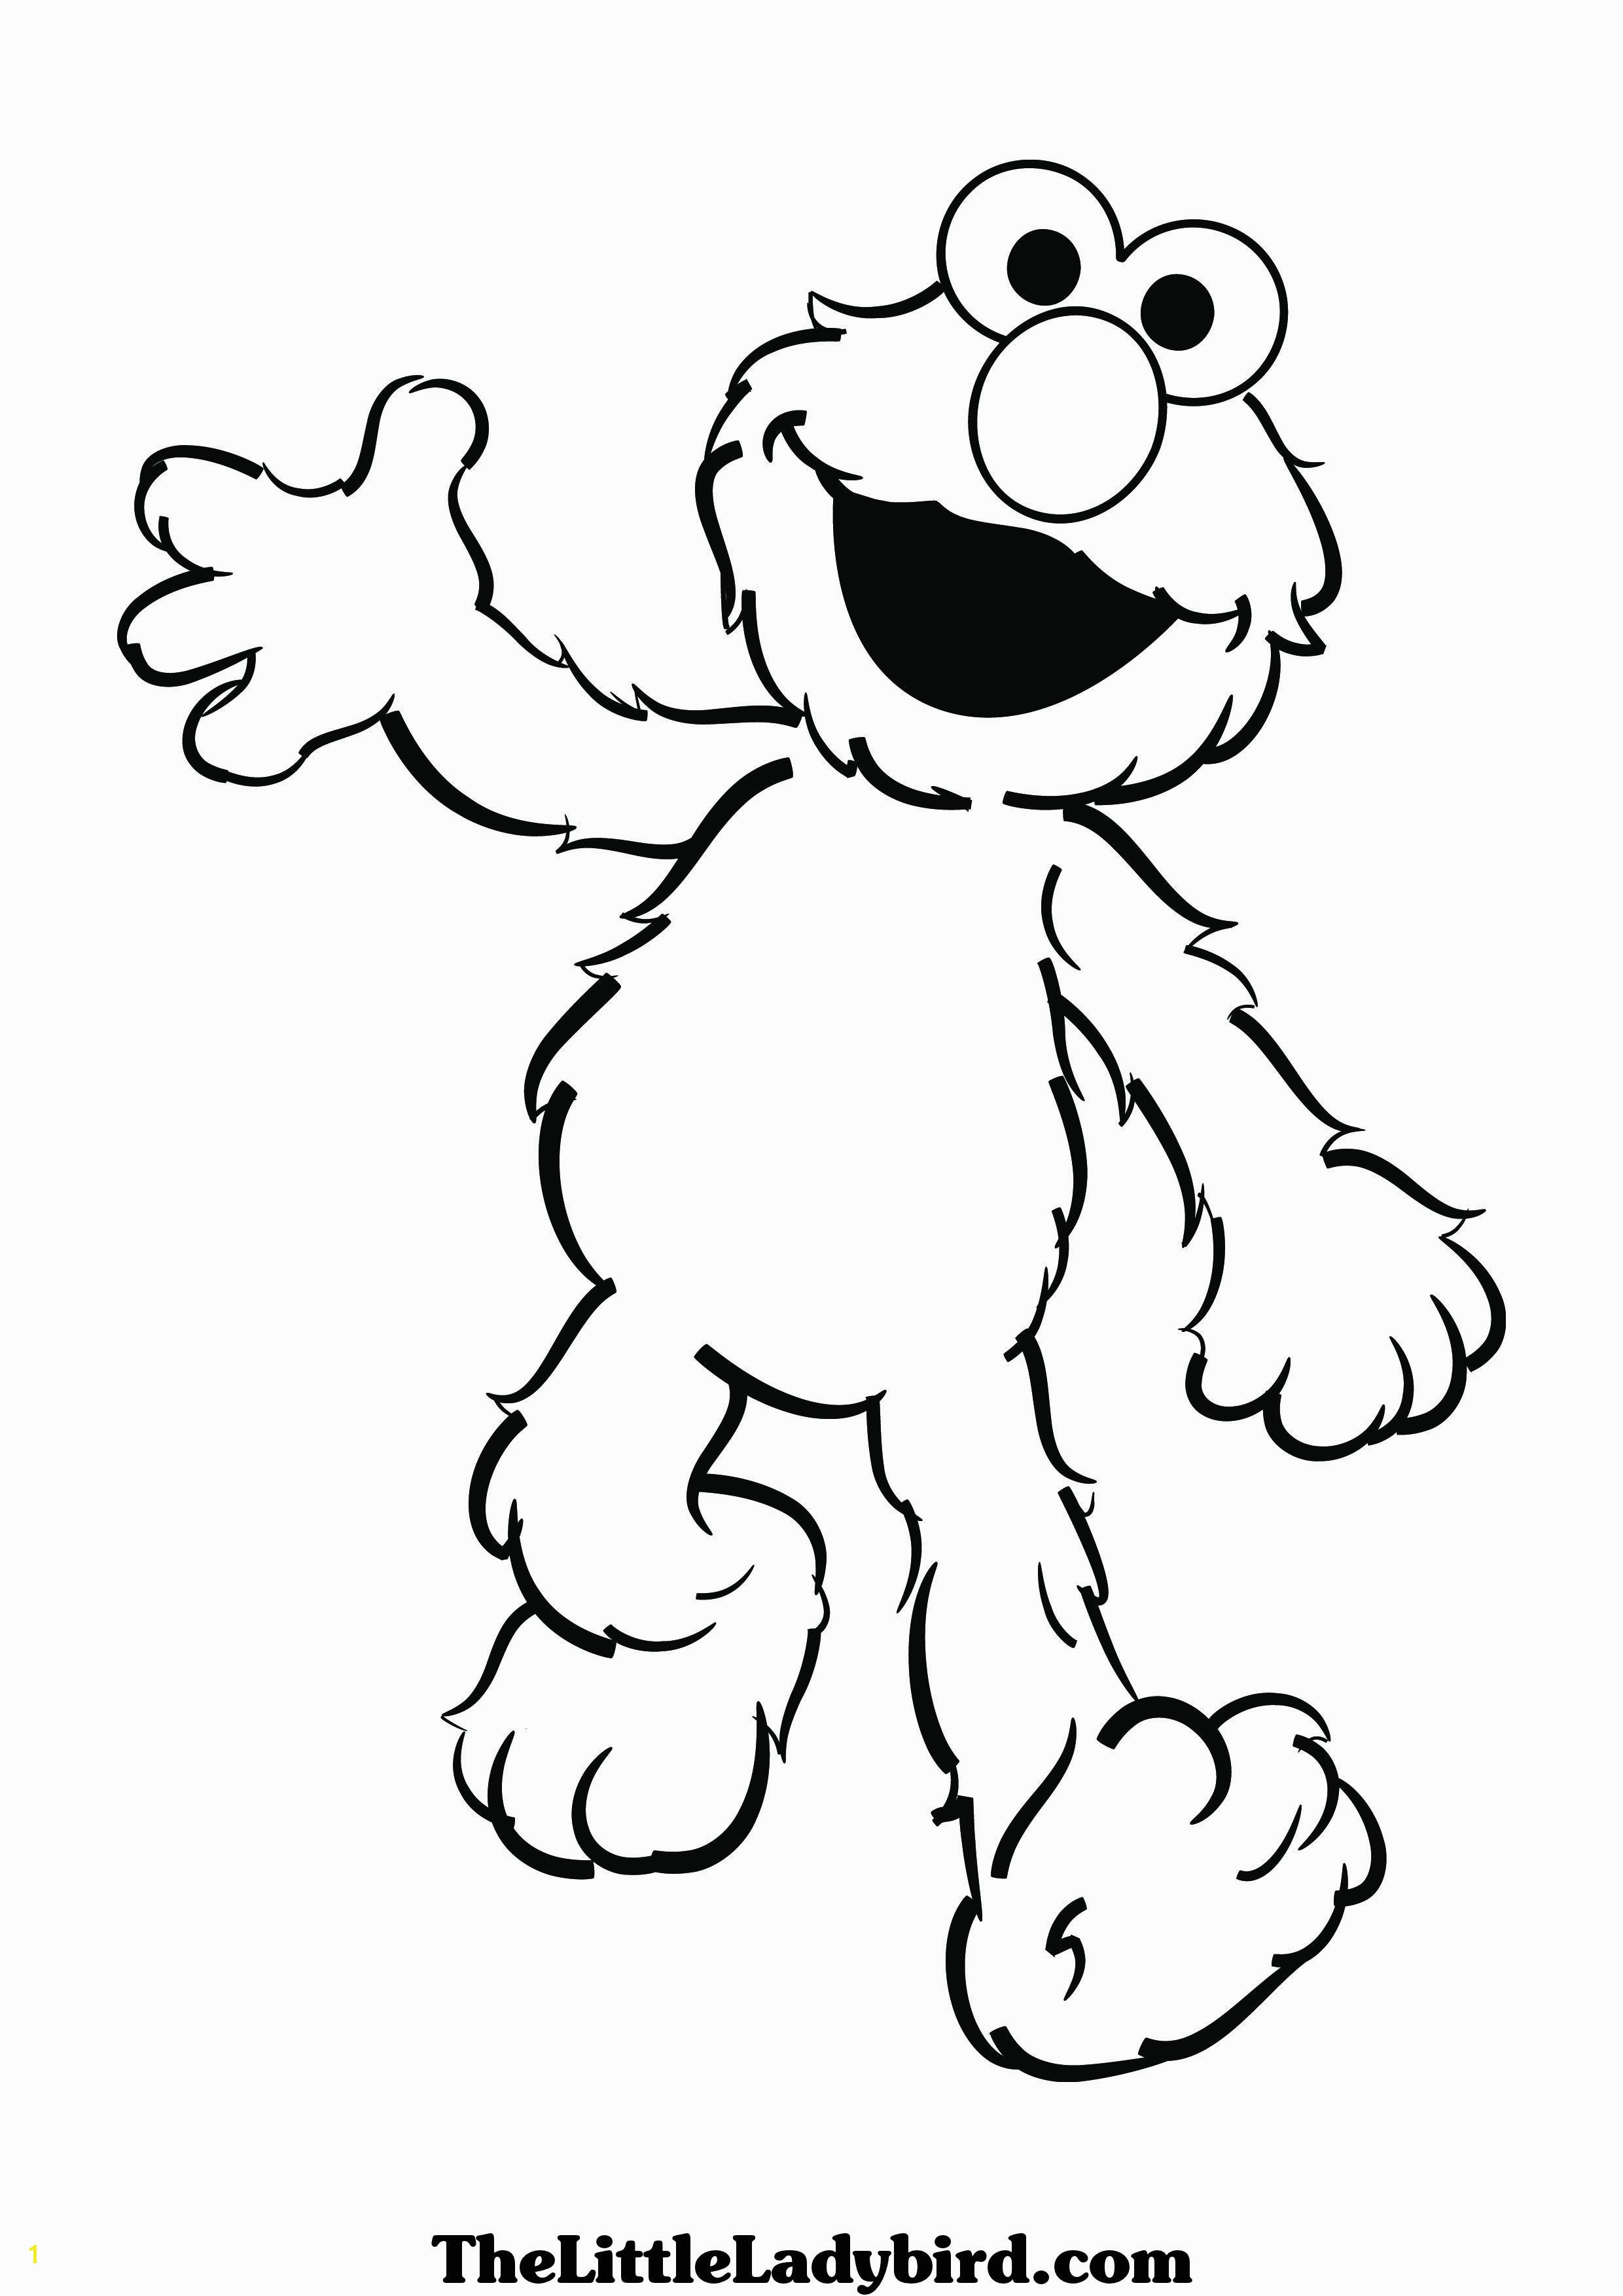 Printables Coloring Pages Valid Selected Elmo Color Pages Free Printable Coloring Page to Download